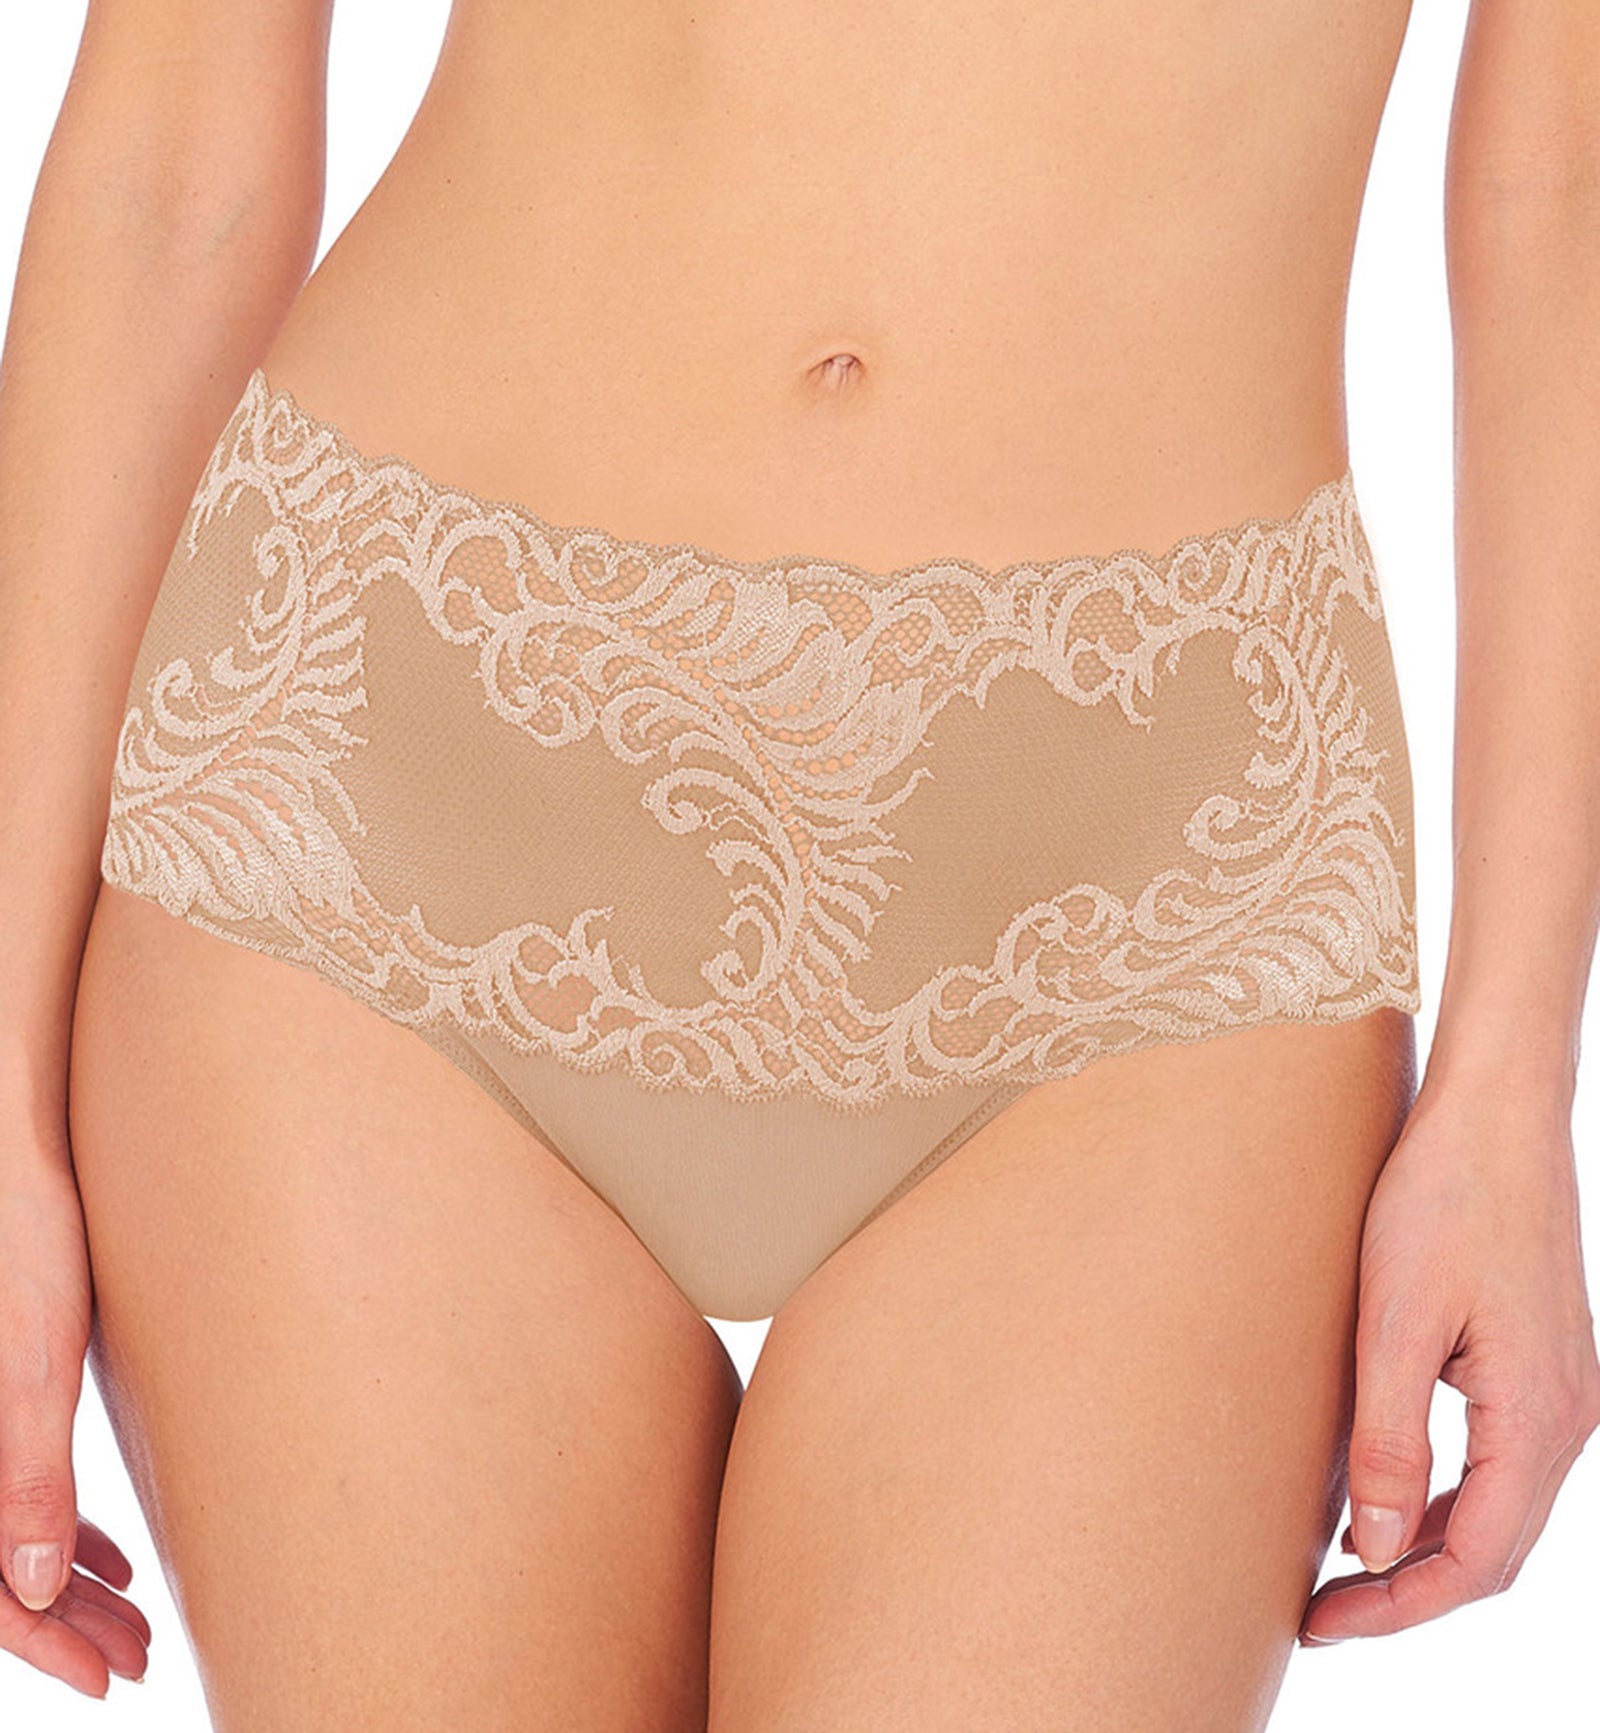 Natori Bliss Girl Brief Panty (756023),Small,Cafe - Cafe,Small